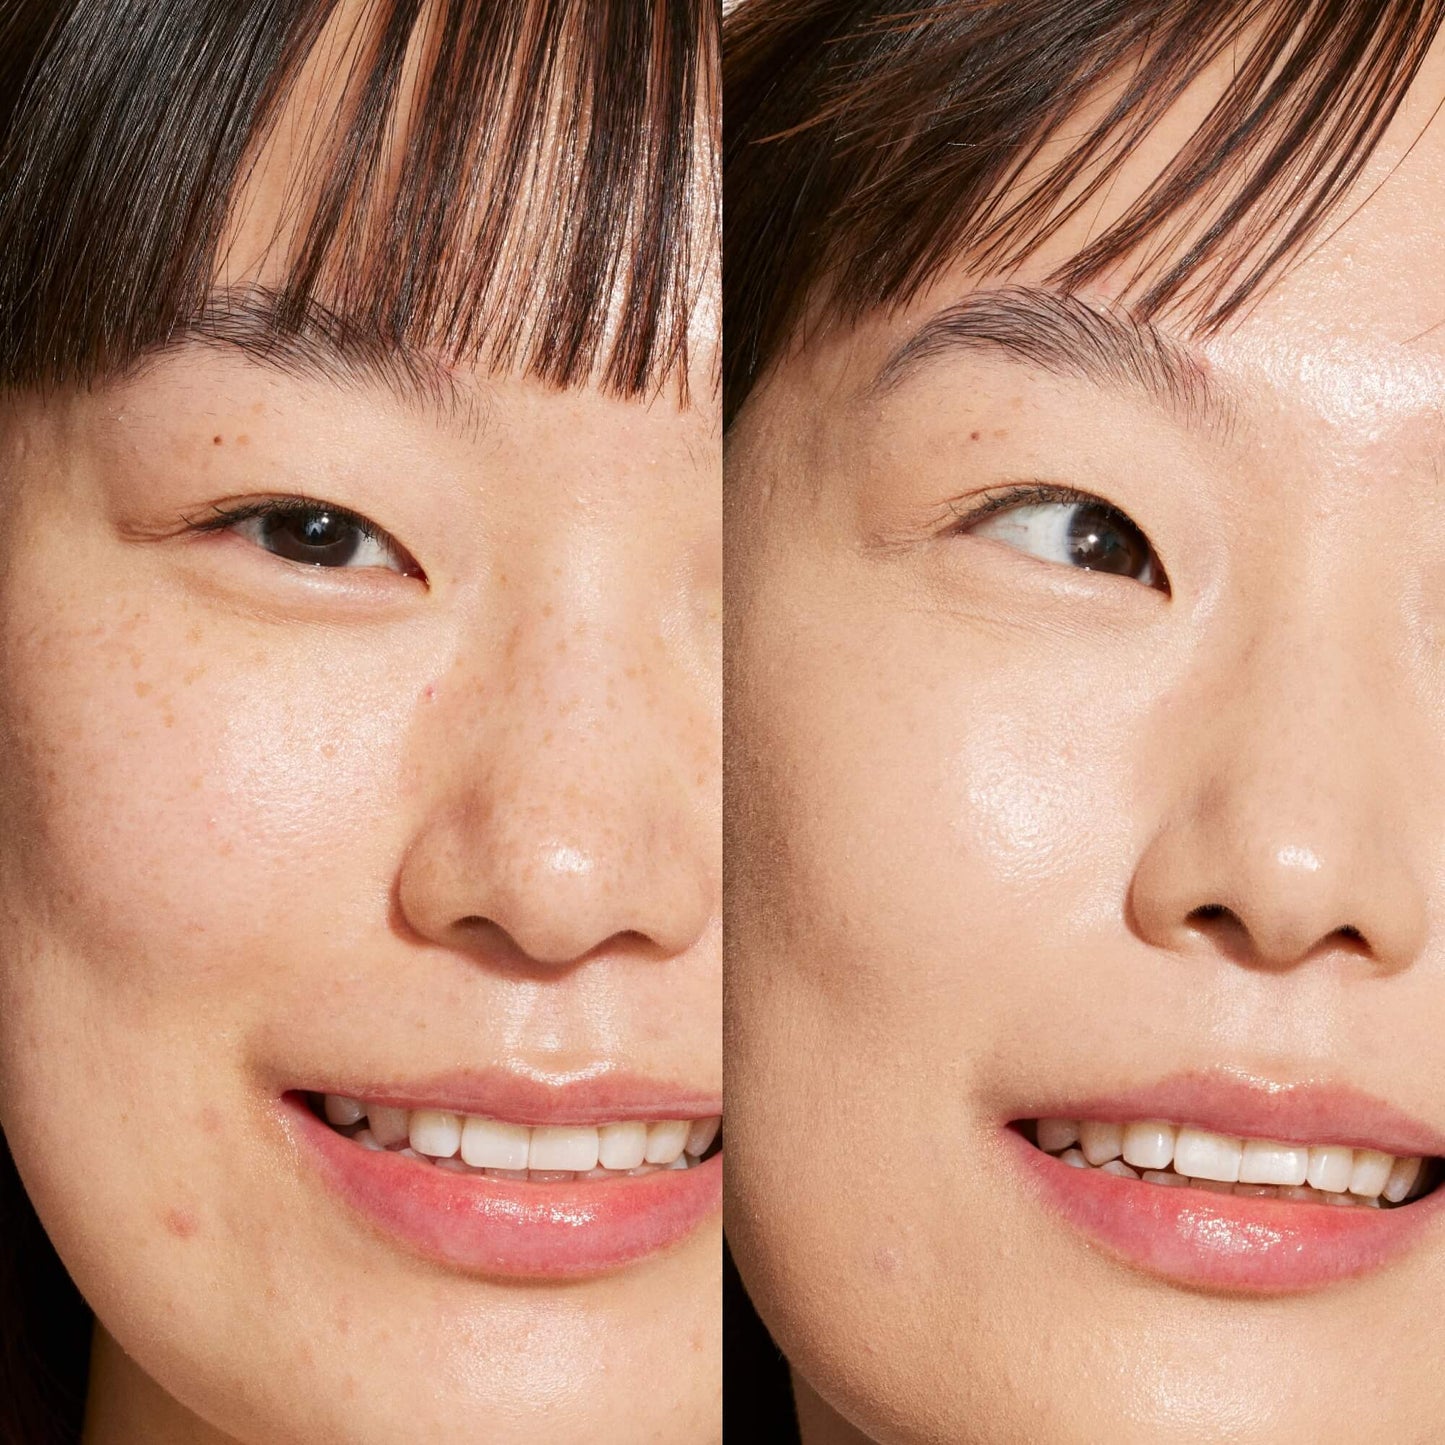 4.0 DTLA [A person's face before and after using Tower 28 Beauty's Swipe Serum Concealer in shade 4.0 DTLA to cover up dark circles, blemishes, and discoloration]